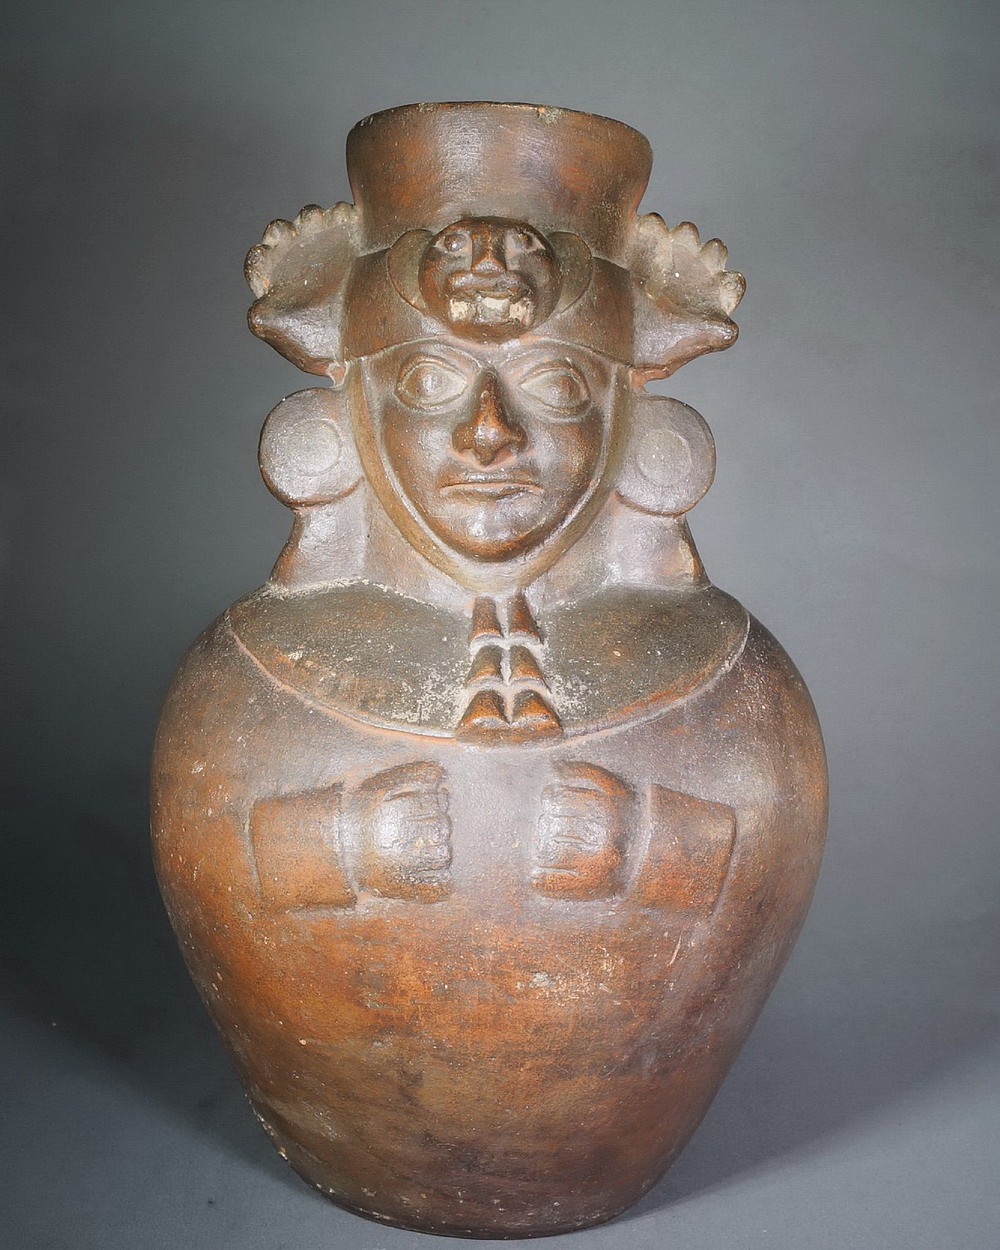 Peru, Moche III/IV Redware Mold Made Jar Depicting a Dignitary
The figure is wearing a head cloth underneath a Puma head ring with straps ending in tassels and large paws, with its polka-dot tail down his back.   He also wears large ear spools which denote his status.  He holds his hands to his chest below a semi-circular breast ornament.  These vessels were made in a two-part mold, one for the front and the other for the back.
Media: Ceramic
Dimensions: Height: 12 1/2"
Price Upon Request
n6049